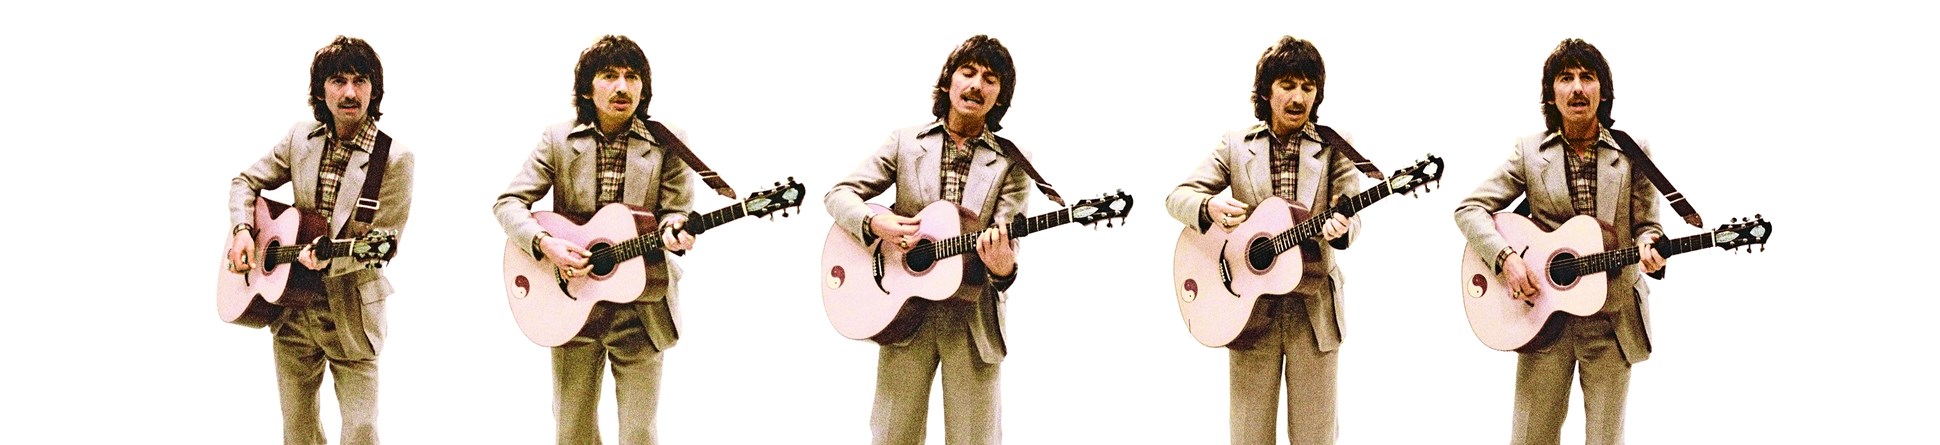 A colour composite image showing 5 different images on a white background of George Harrison playing the guitar in a brown suit